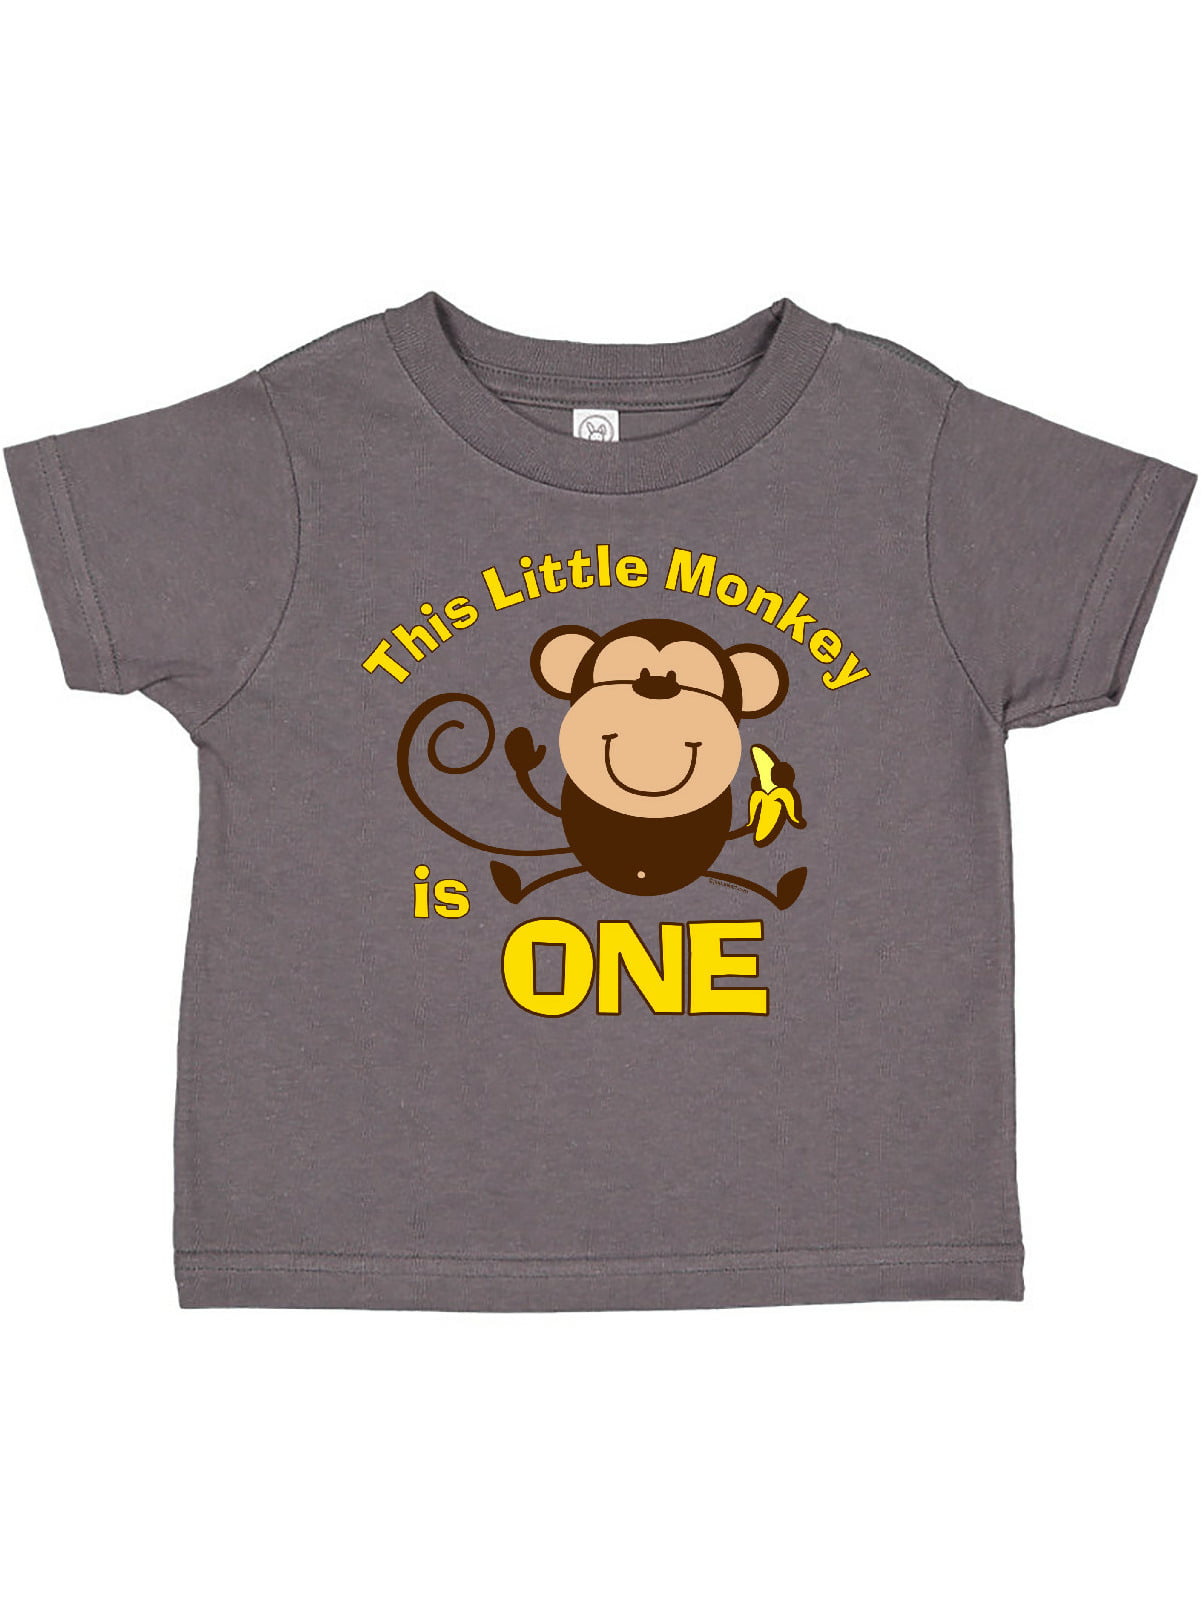 1st Birthday Shirts with Cute Monkey for Toddler Boys Tees